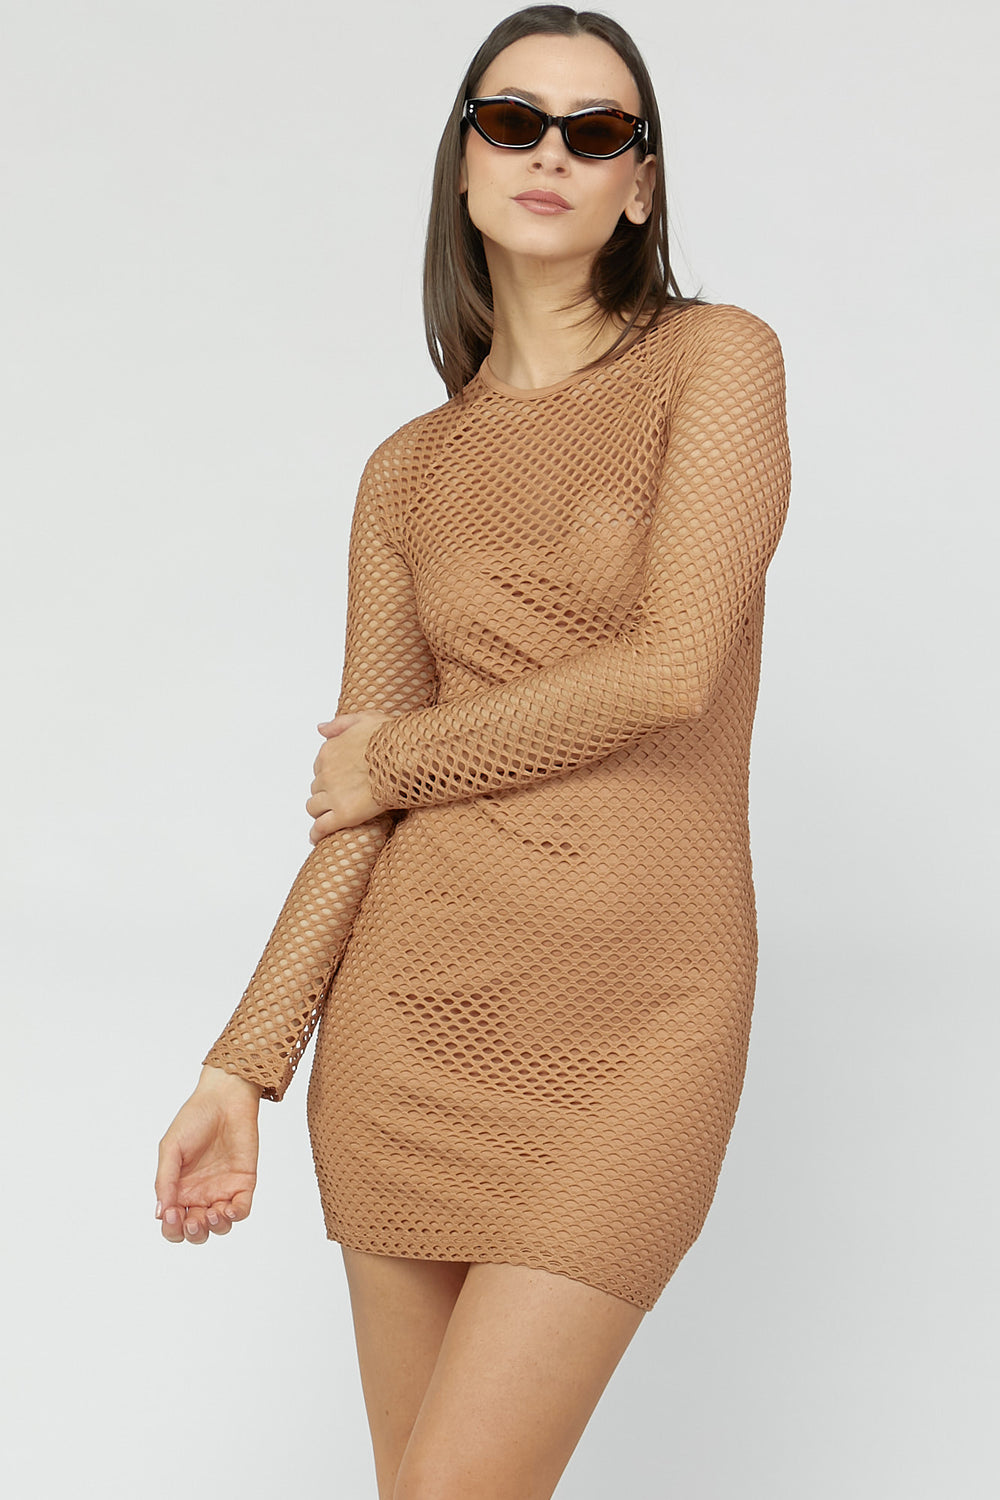 Netted Mesh Long Sleeves Bodycon Dress Taupe